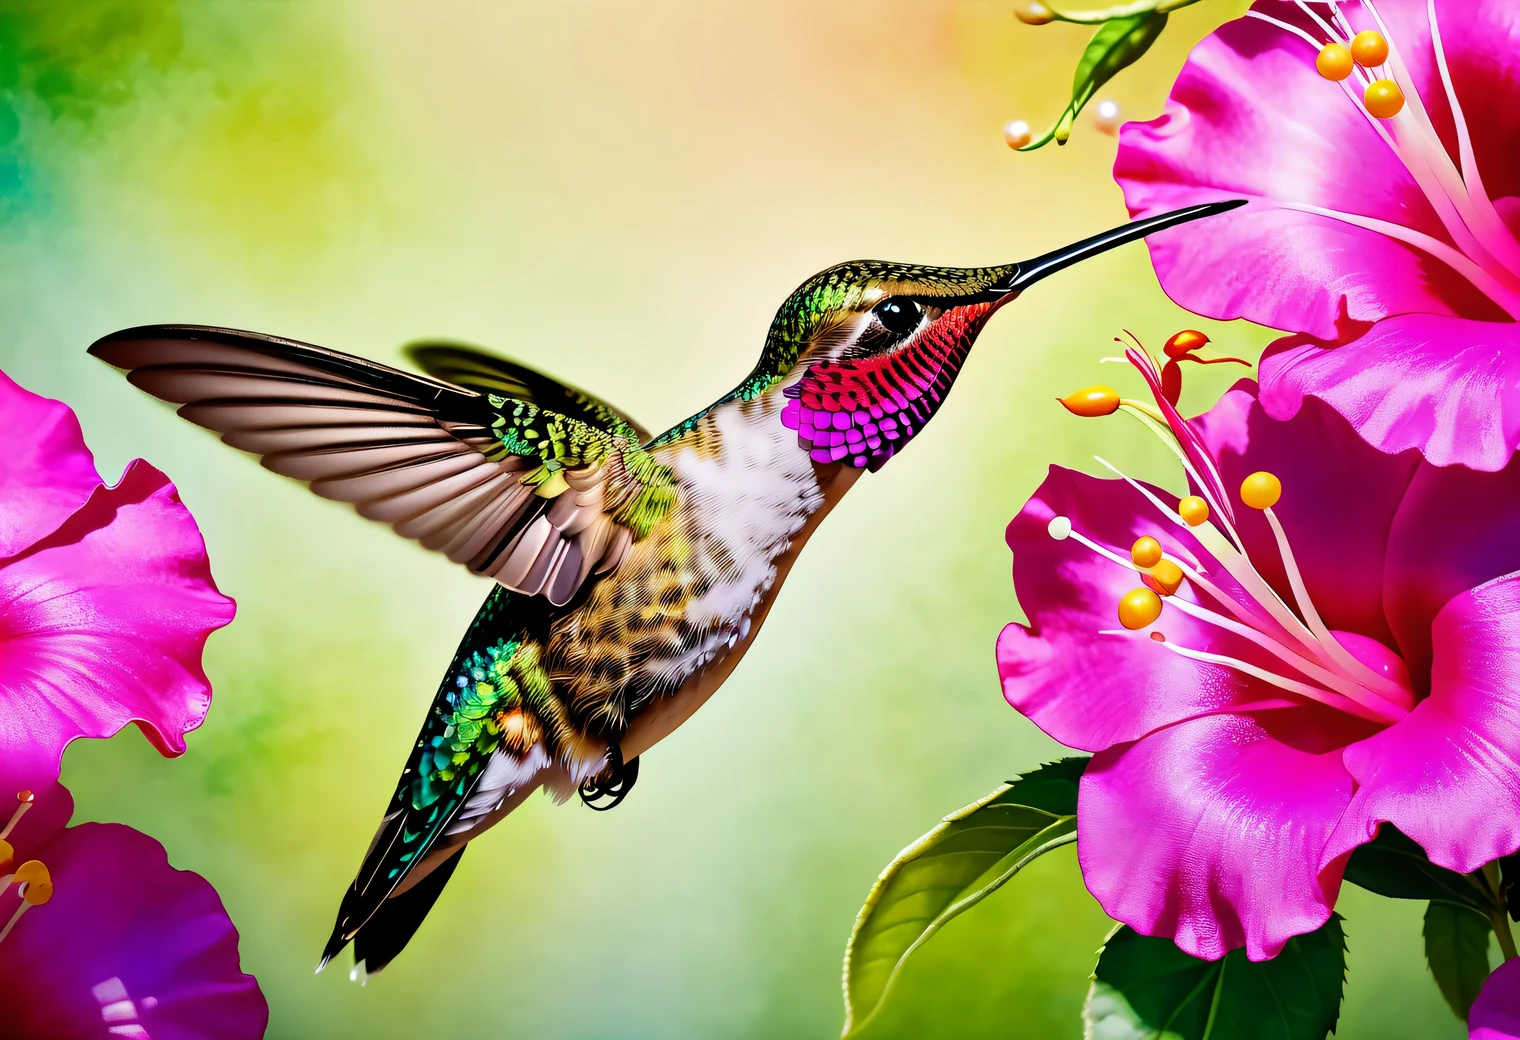 The art of painting on silk, batik, hand painted silk, 1 bright hummingbird with two wings drinks nectar from a flower, High detail, Texture smoothing, pearlescent silk shine, pearlescent color palette, centered focus, depth of field, Smooth transitions, blurry outlines, colors with pearlescent shades, fog effect around the edges of the image